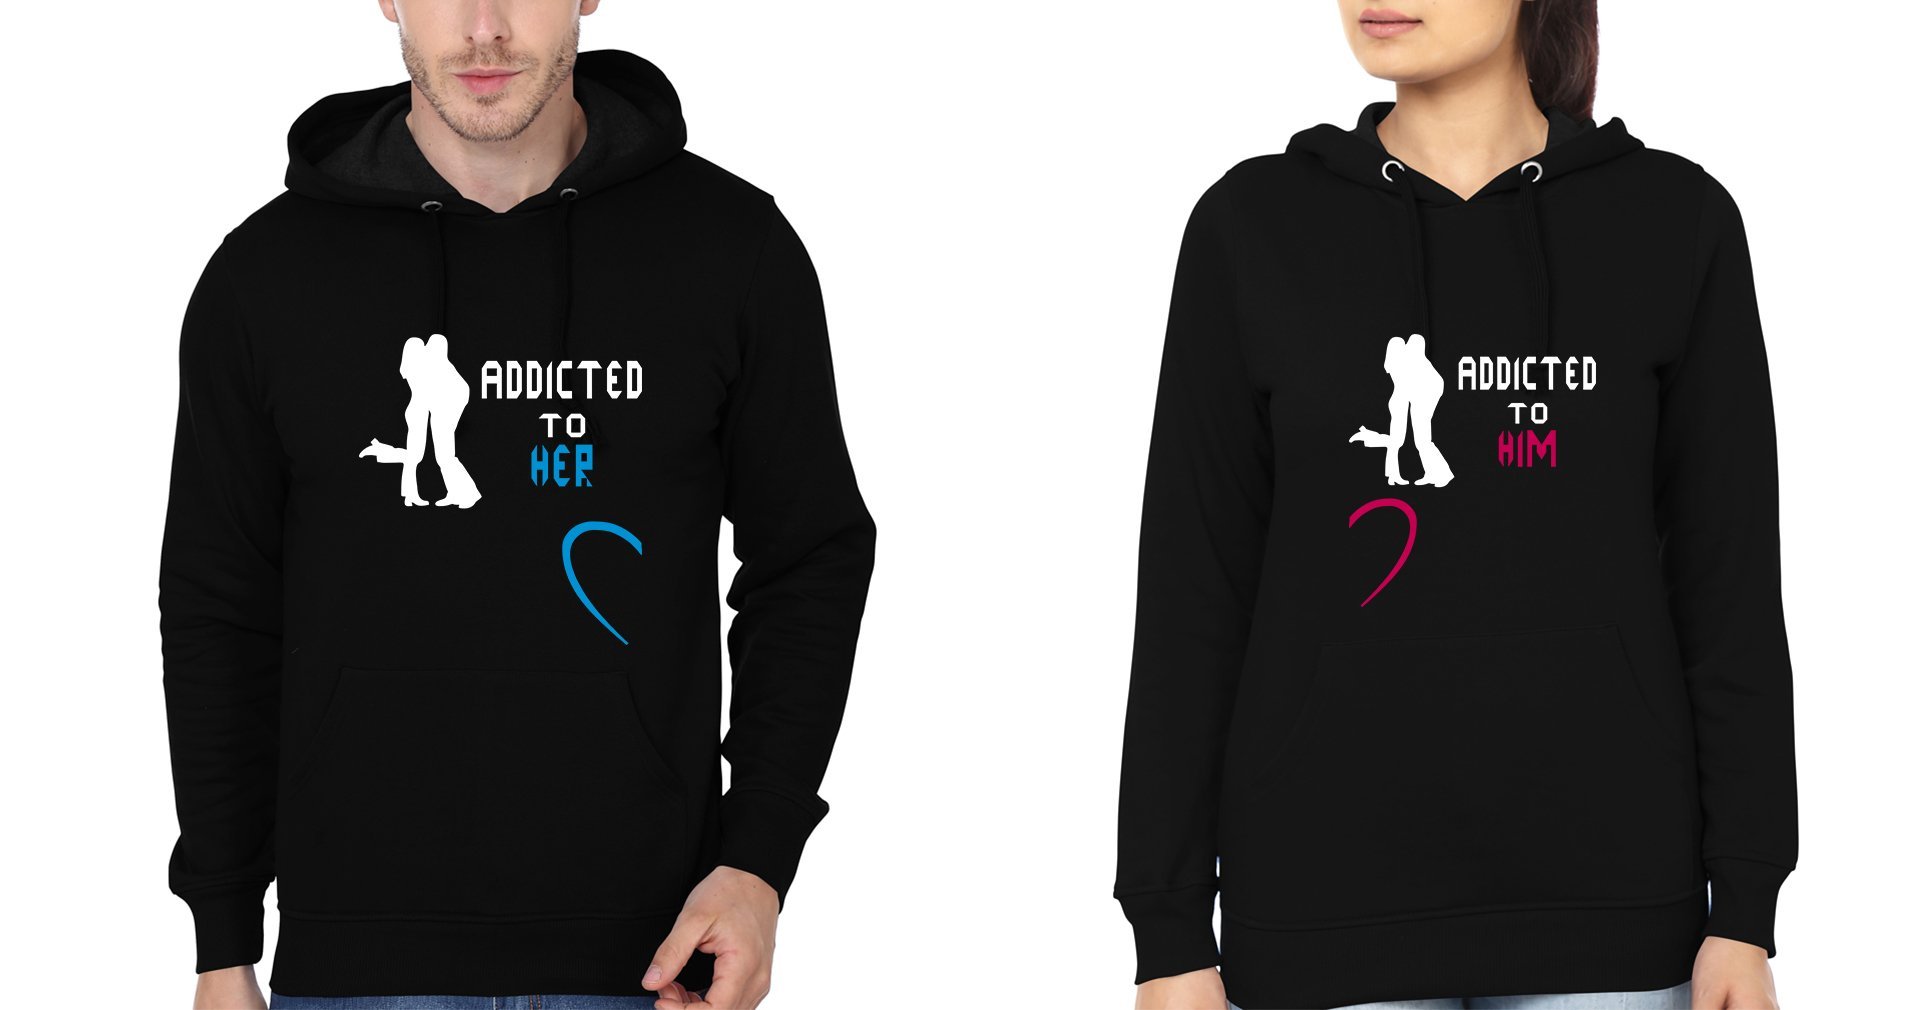 Addicted to her him Couple Hoodie-FunkyTradition - FunkyTradition